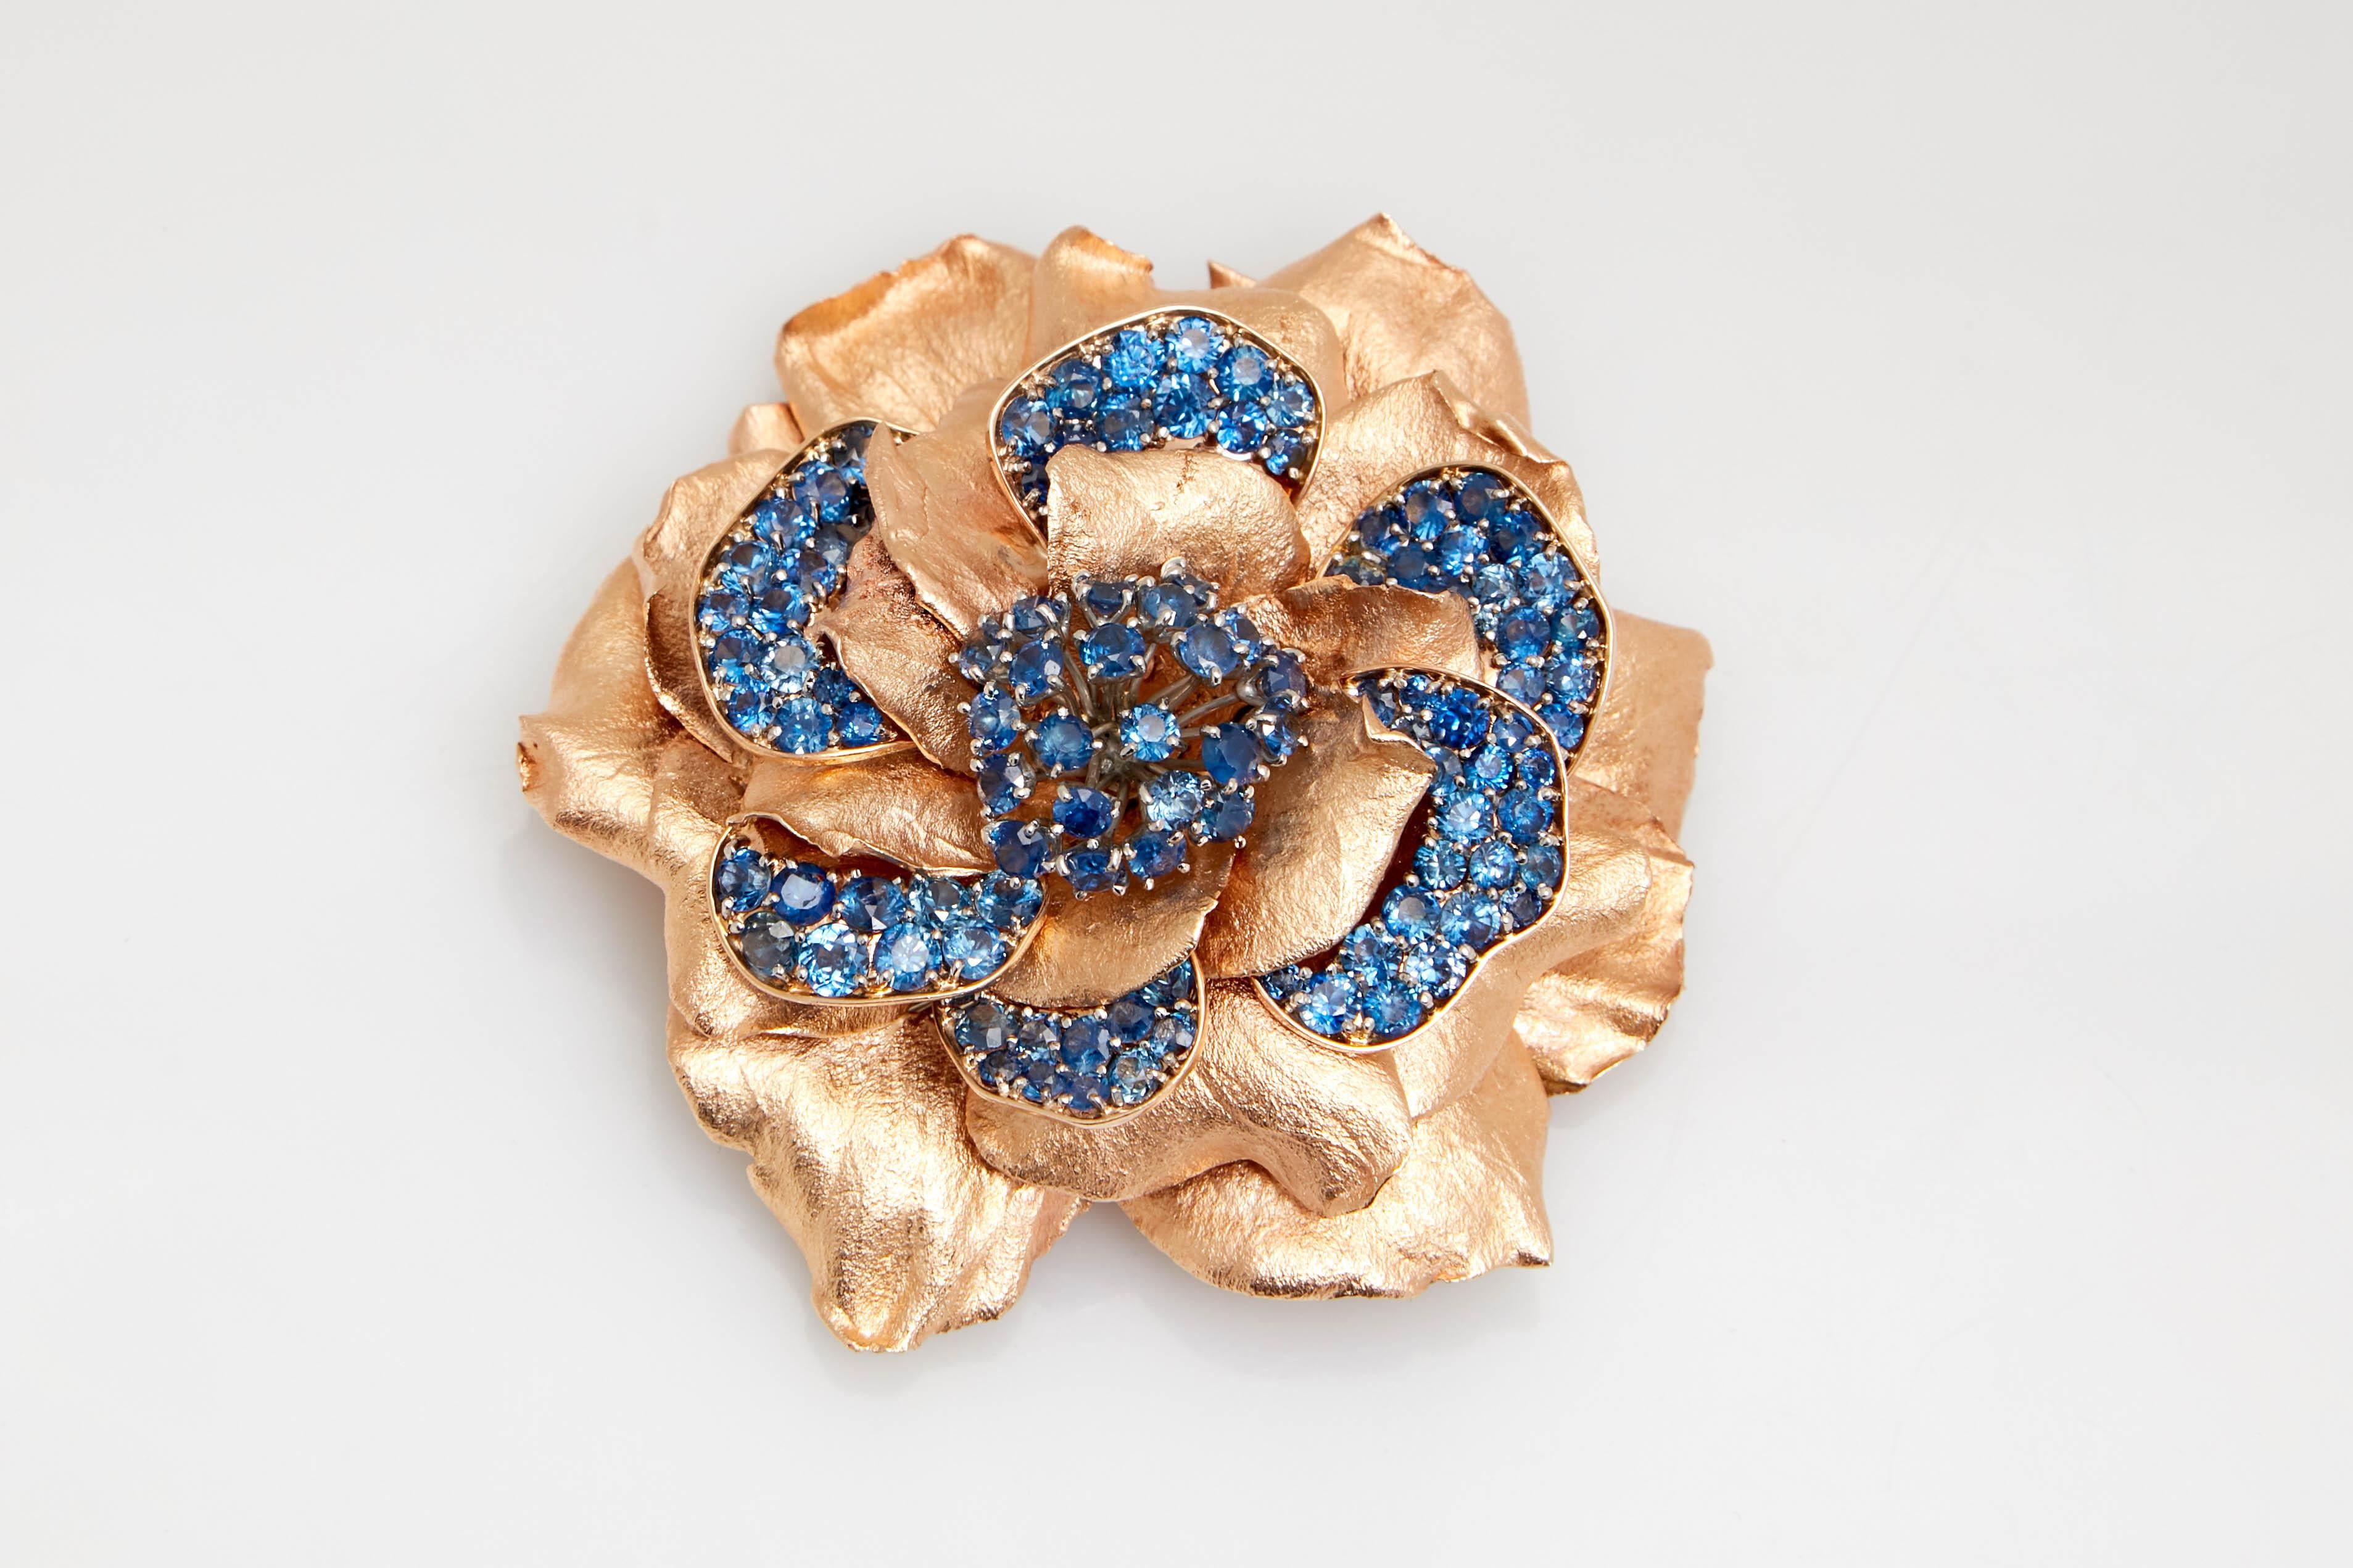 Retro Van Cleef & Arpels New York rose gold and sapphire flower clip-brooch. Made in the United States, circa 1955.
14 kt., the large flower fashioned of layers of folded petals, embellished by round sapphires approximately 16.90 cts., signed Van